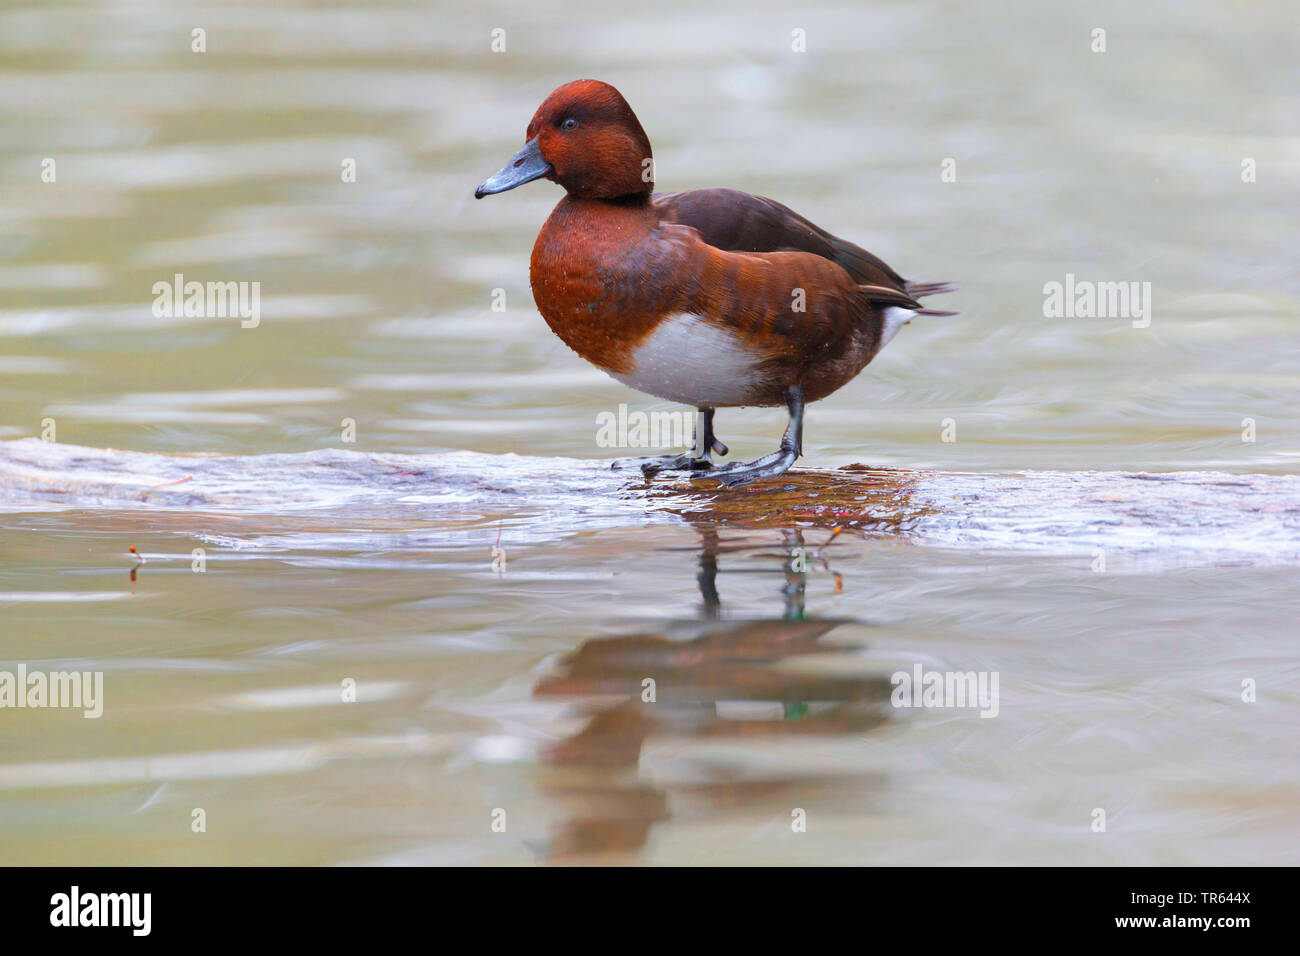 ferruginous duck (Aythya nyroca), standing on a swimming wooden plank, side view, Germany Stock Photo